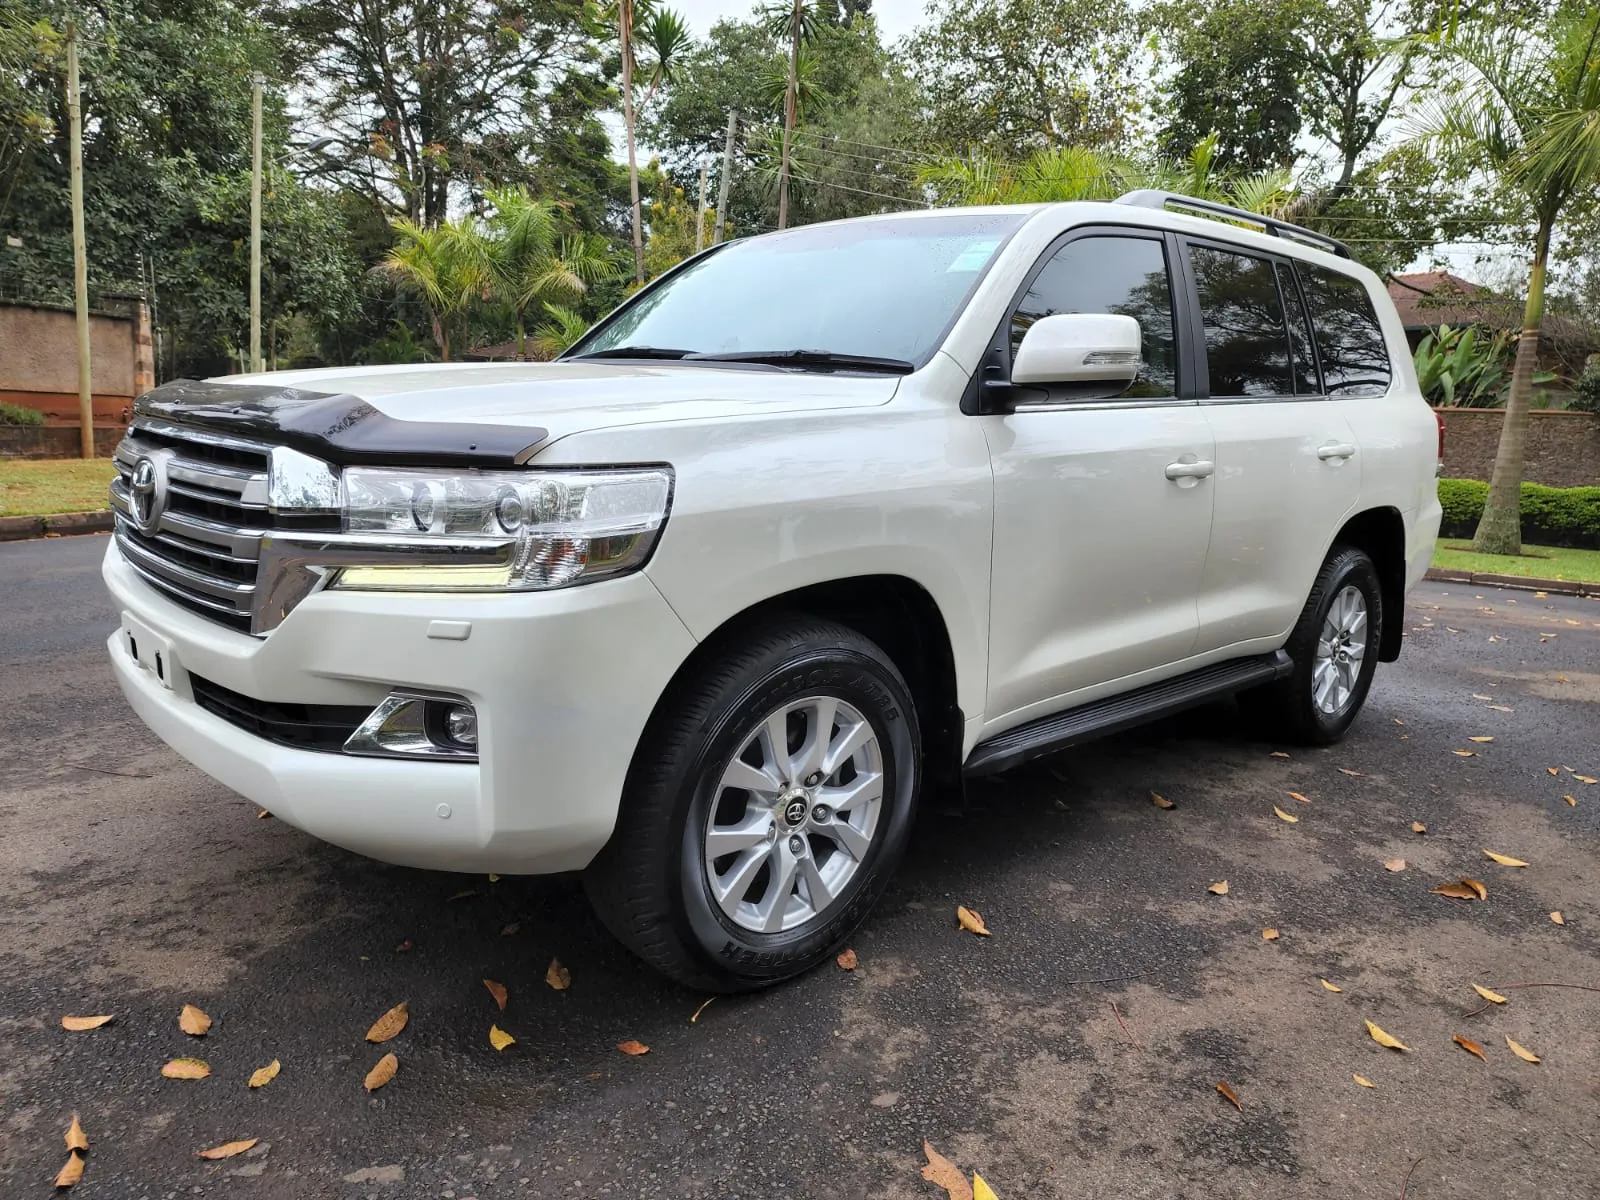 Cars Cars For Sale/Vehicles-2018 Land Cruiser VX V8 DIESEL Exclusively Hot Deal 8